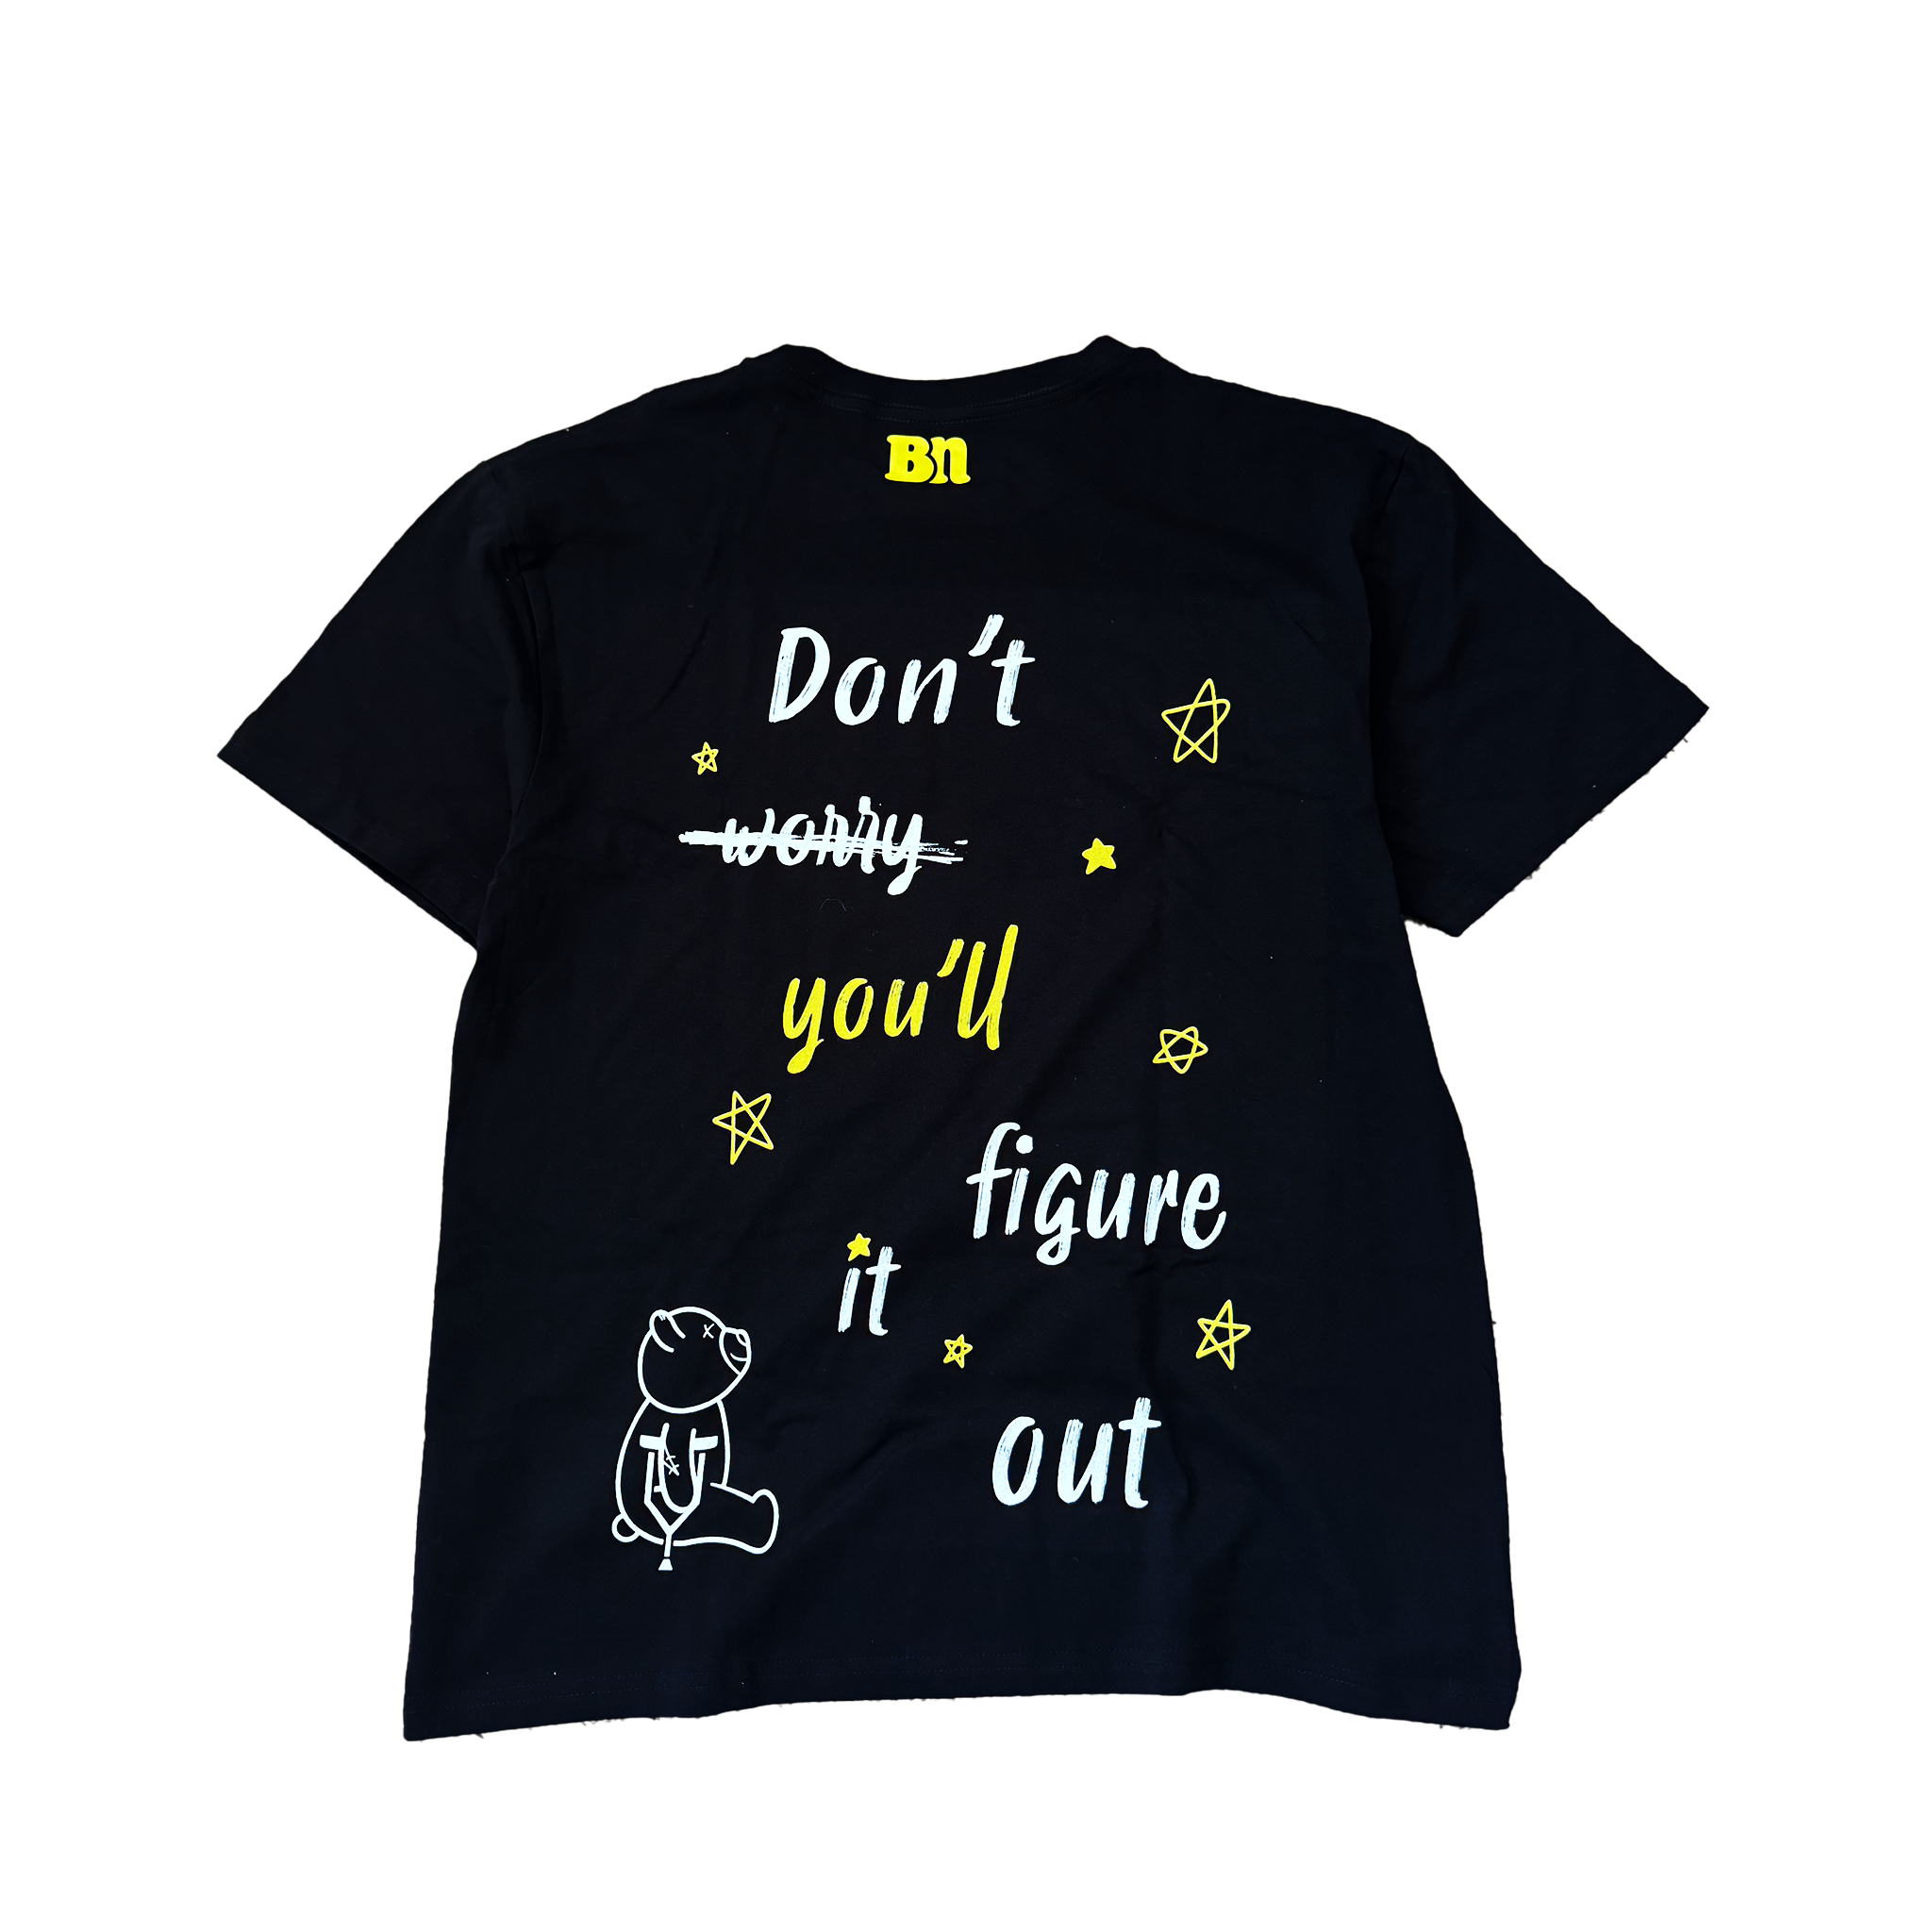 An oversized black Don't Worry Tee by Better not with yellow text that reads "don't worry, you'll figure it out," accompanied by stars, lines, and an illustration of a sitting bear.